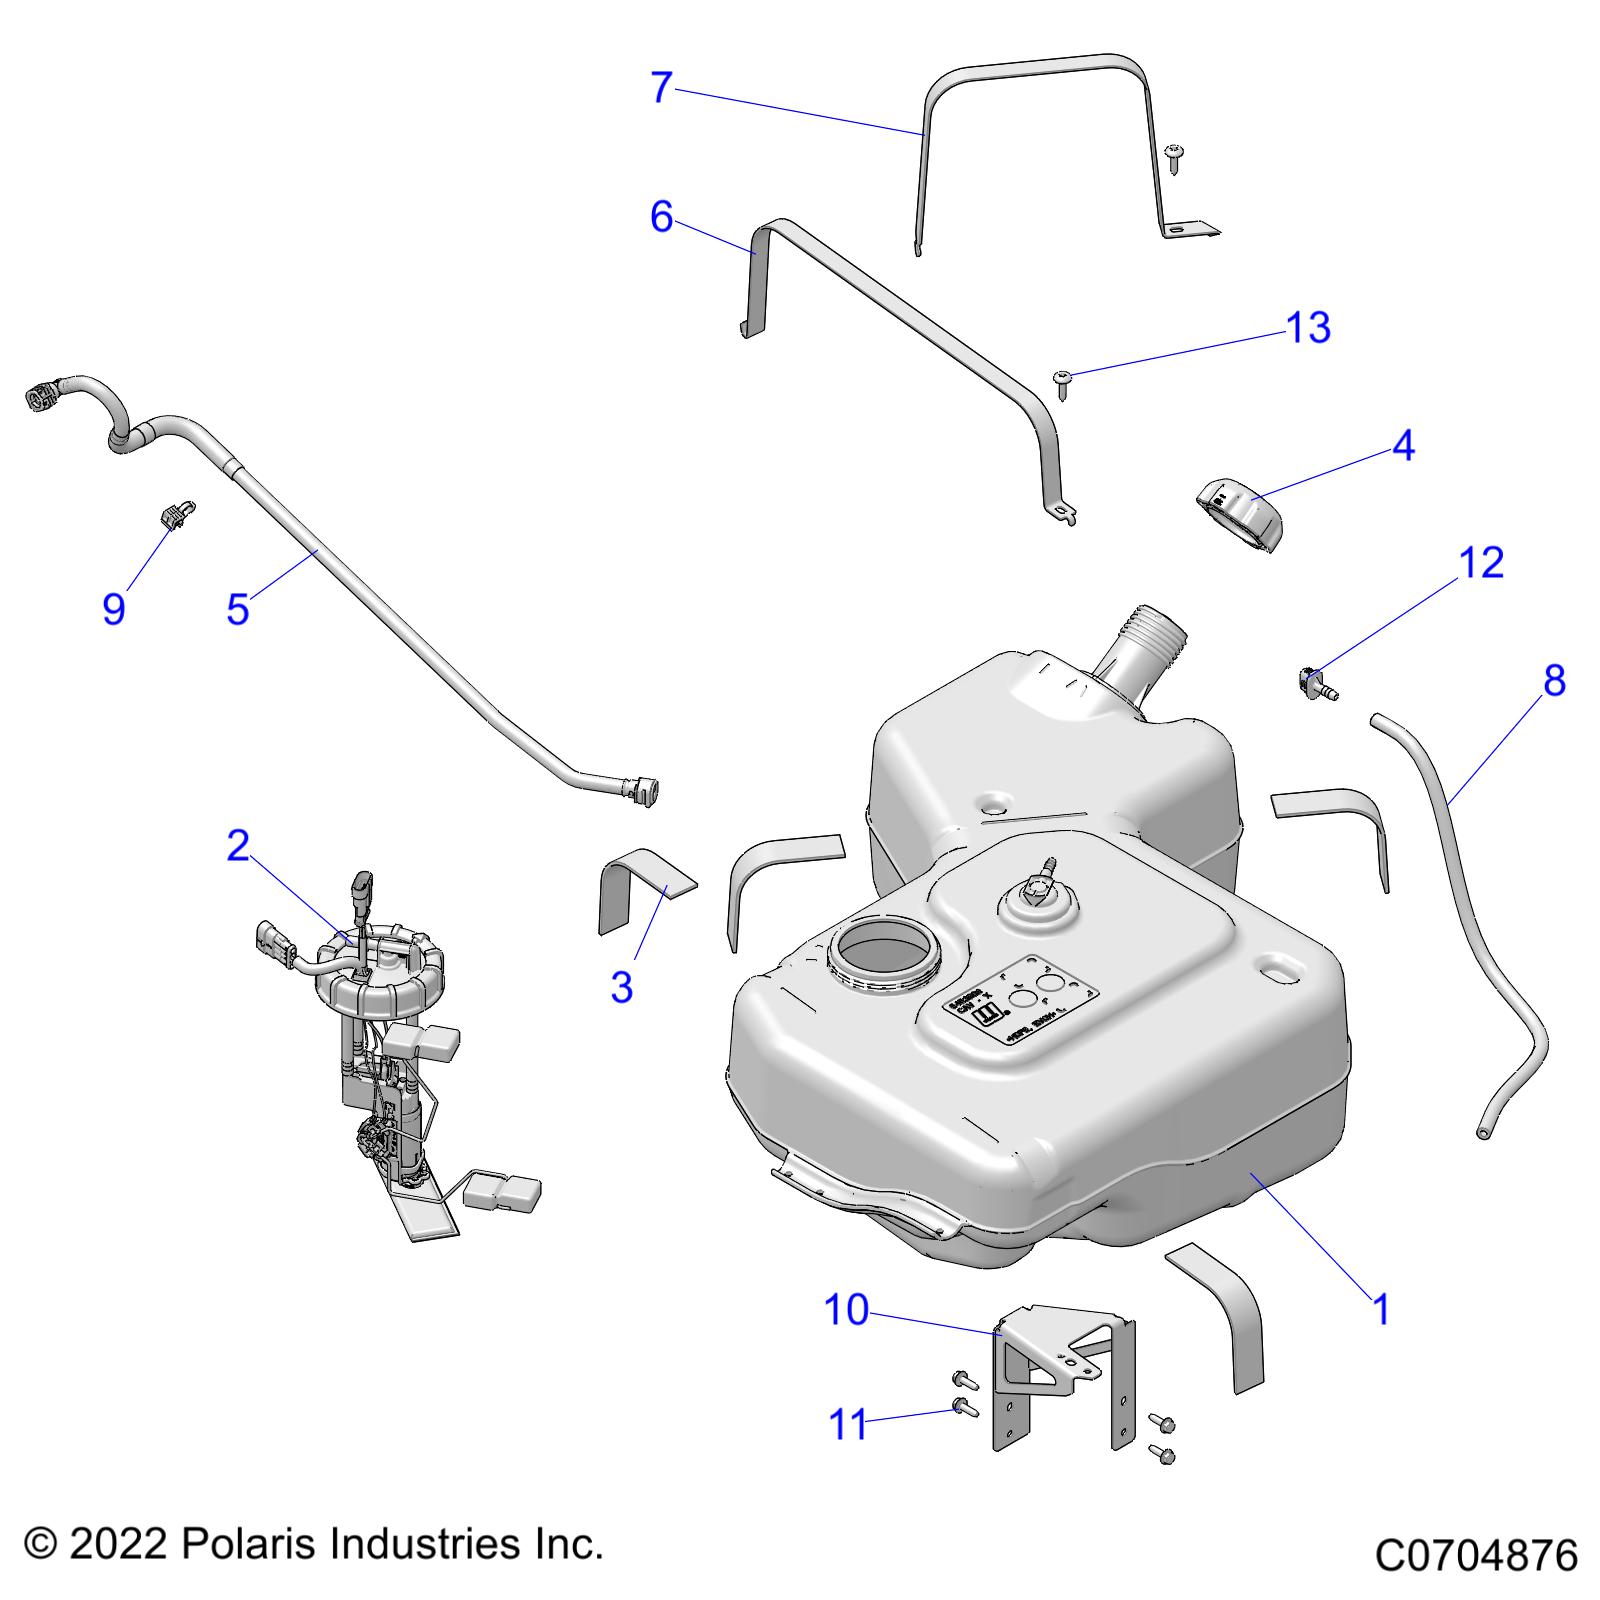 Part Number : 2521937 CAP-GAS TANK TETHER